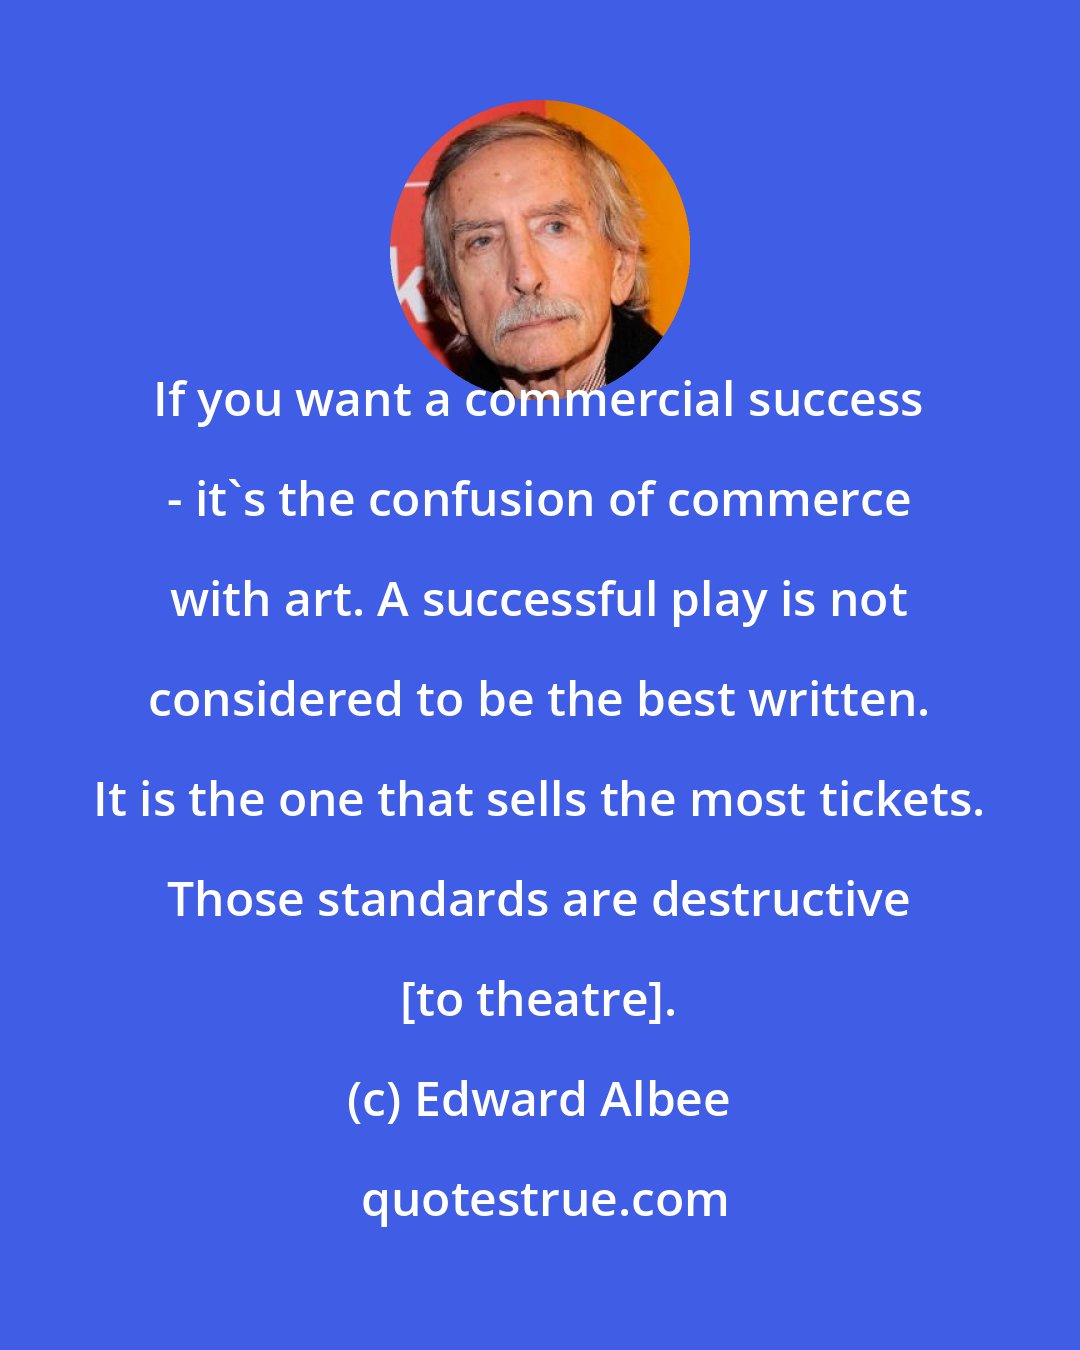 Edward Albee: If you want a commercial success - it's the confusion of commerce with art. A successful play is not considered to be the best written. It is the one that sells the most tickets. Those standards are destructive [to theatre].